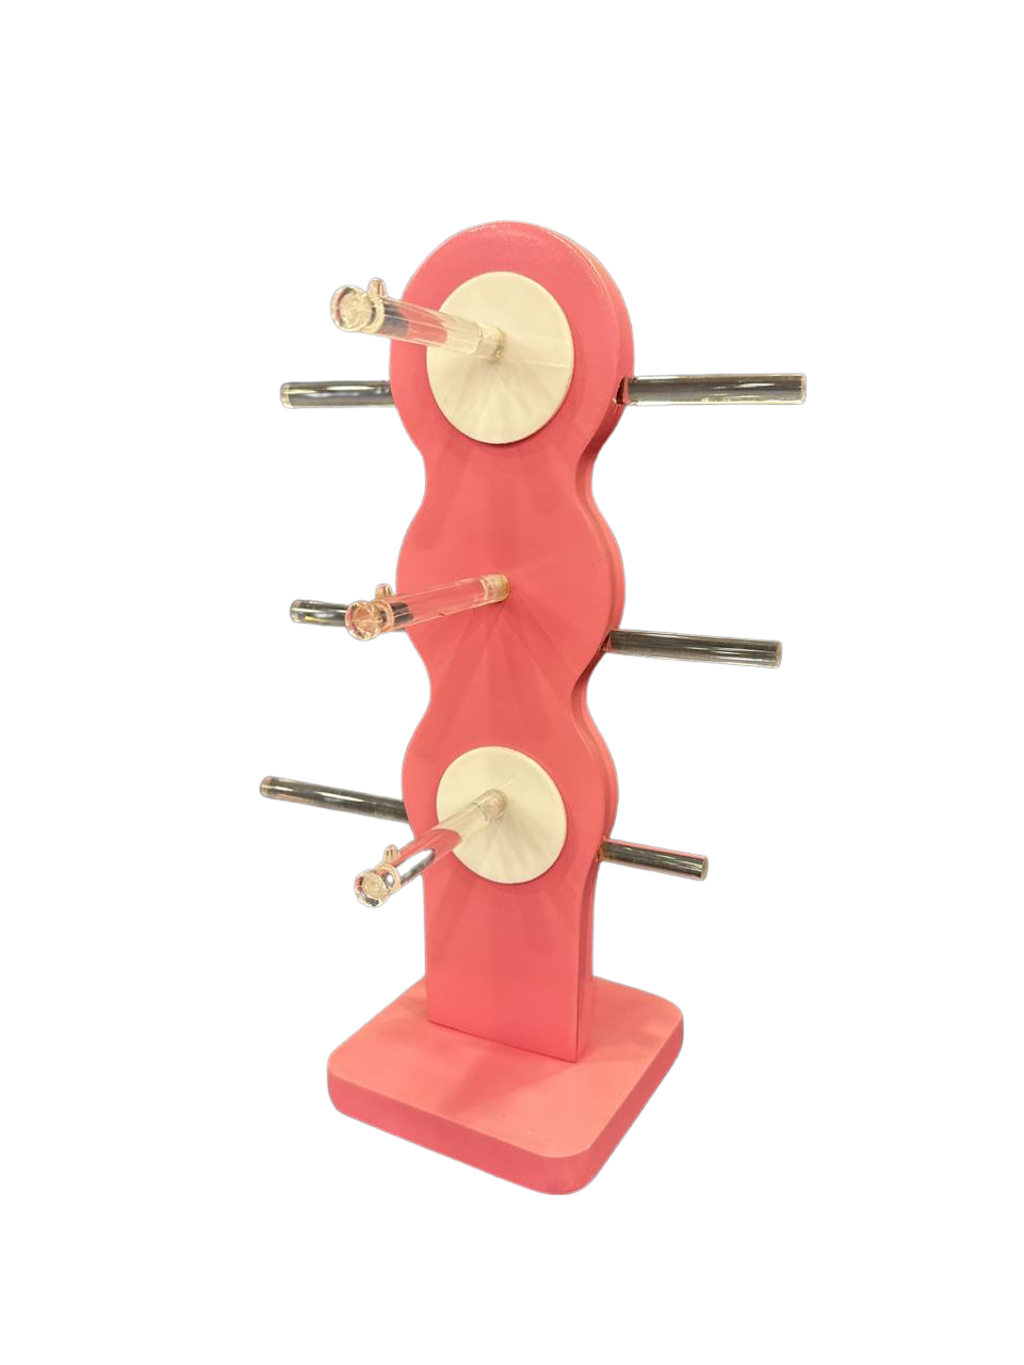 361007 - SPECTACLES STAND B049 (PINK)